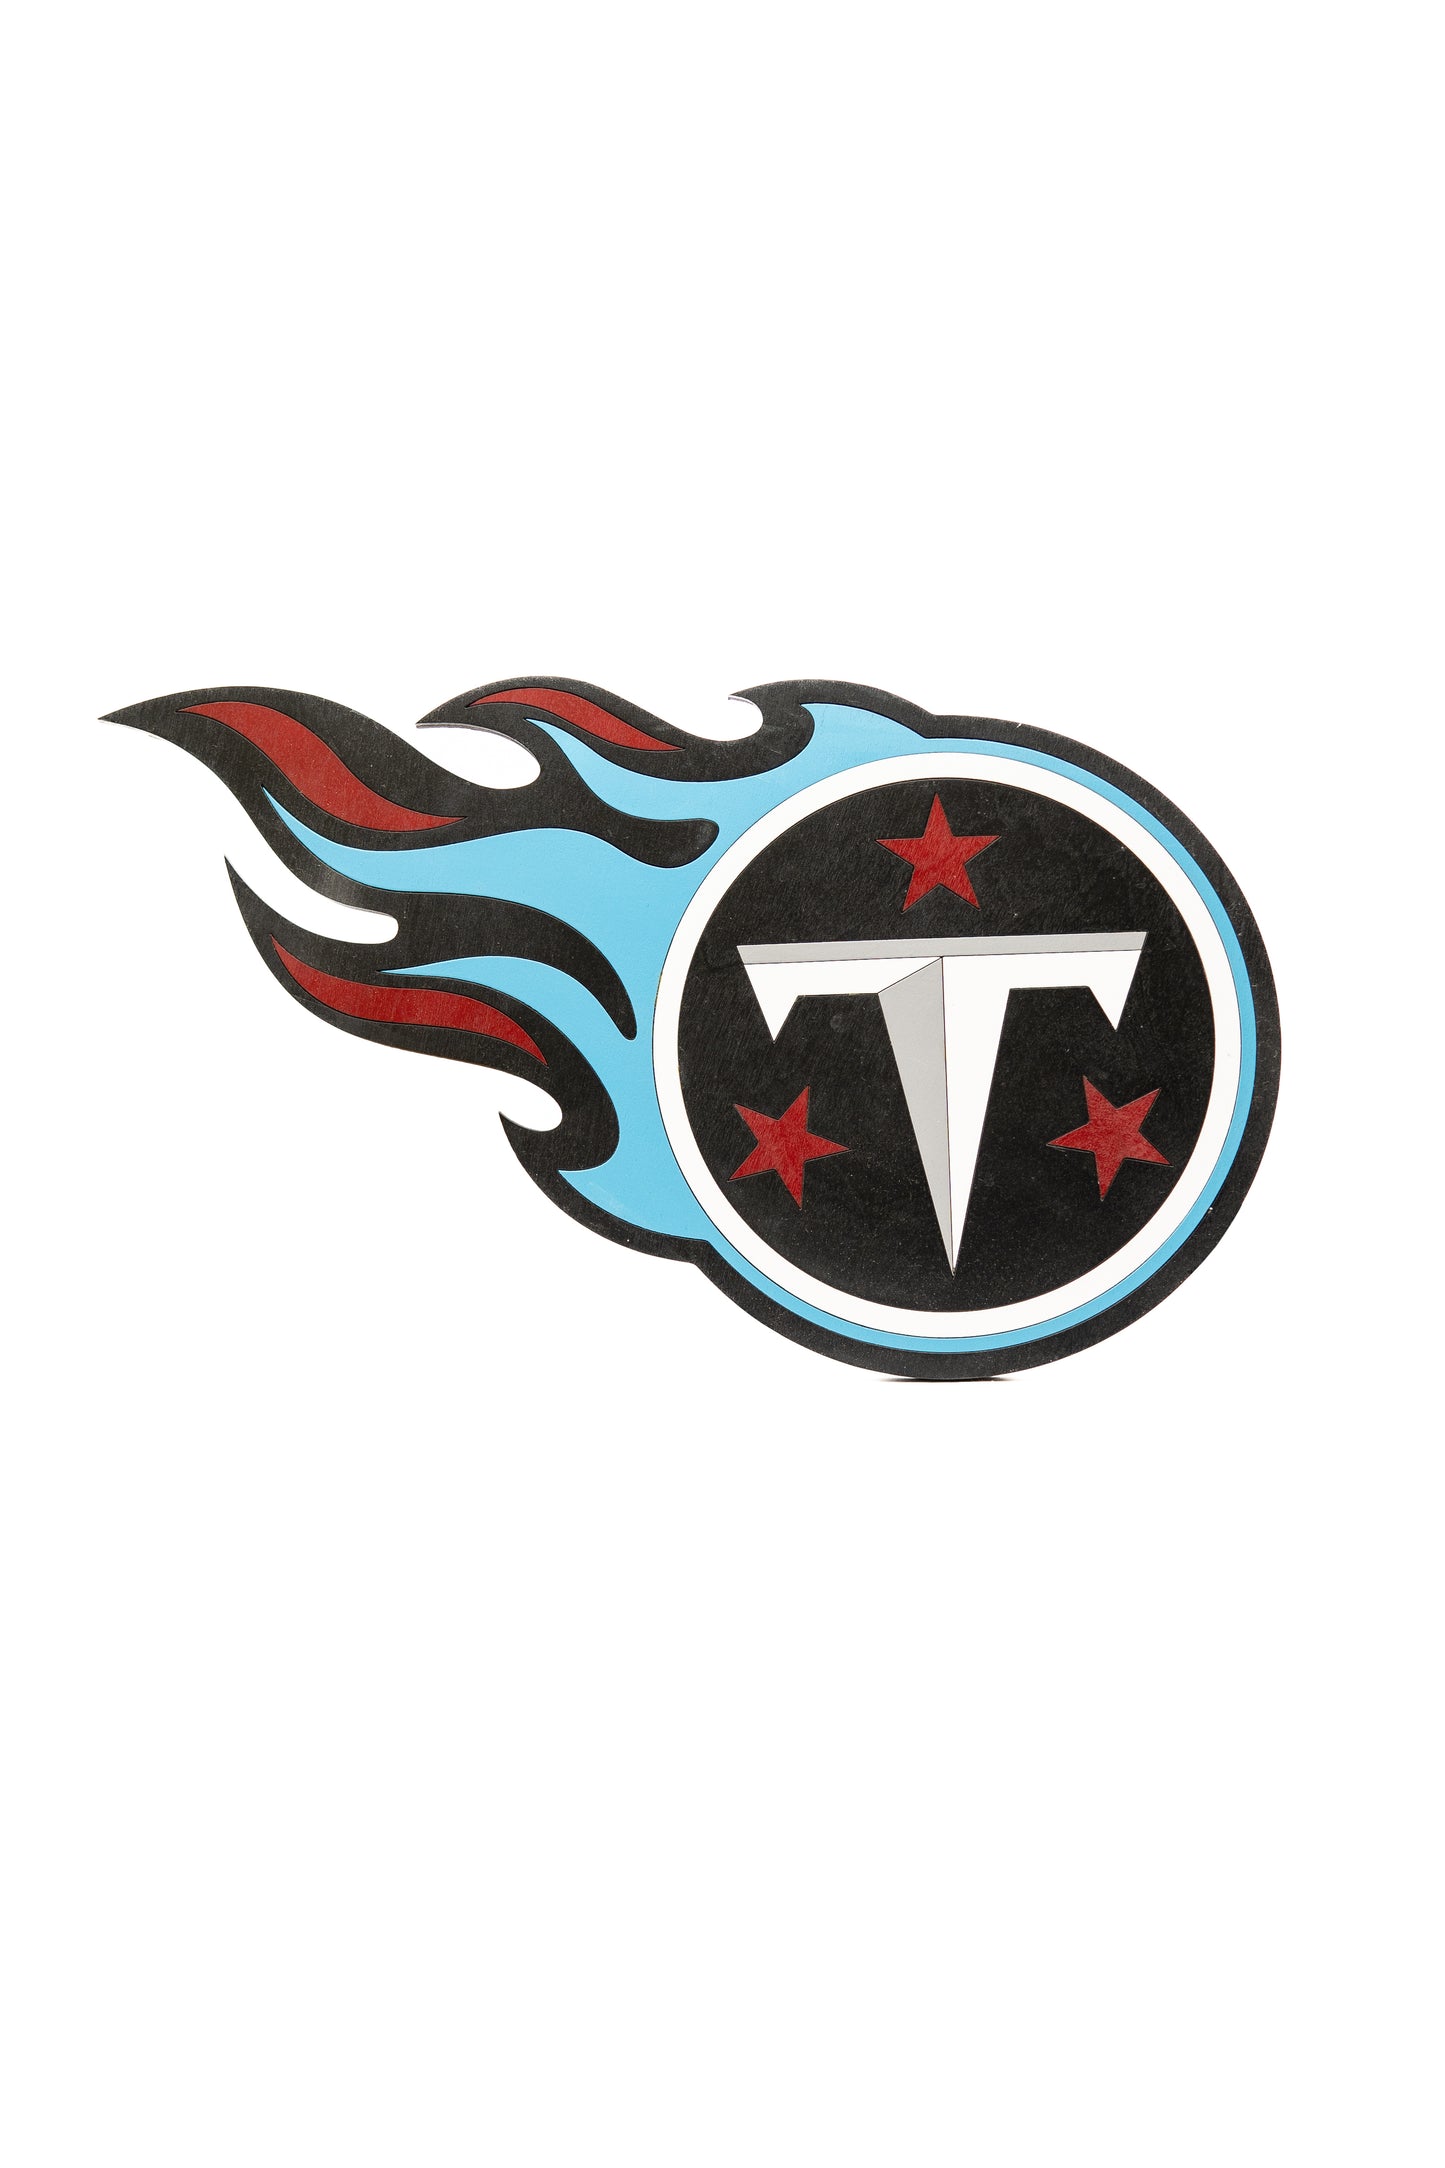 "Tennessee Titans" Wooden Wall Art